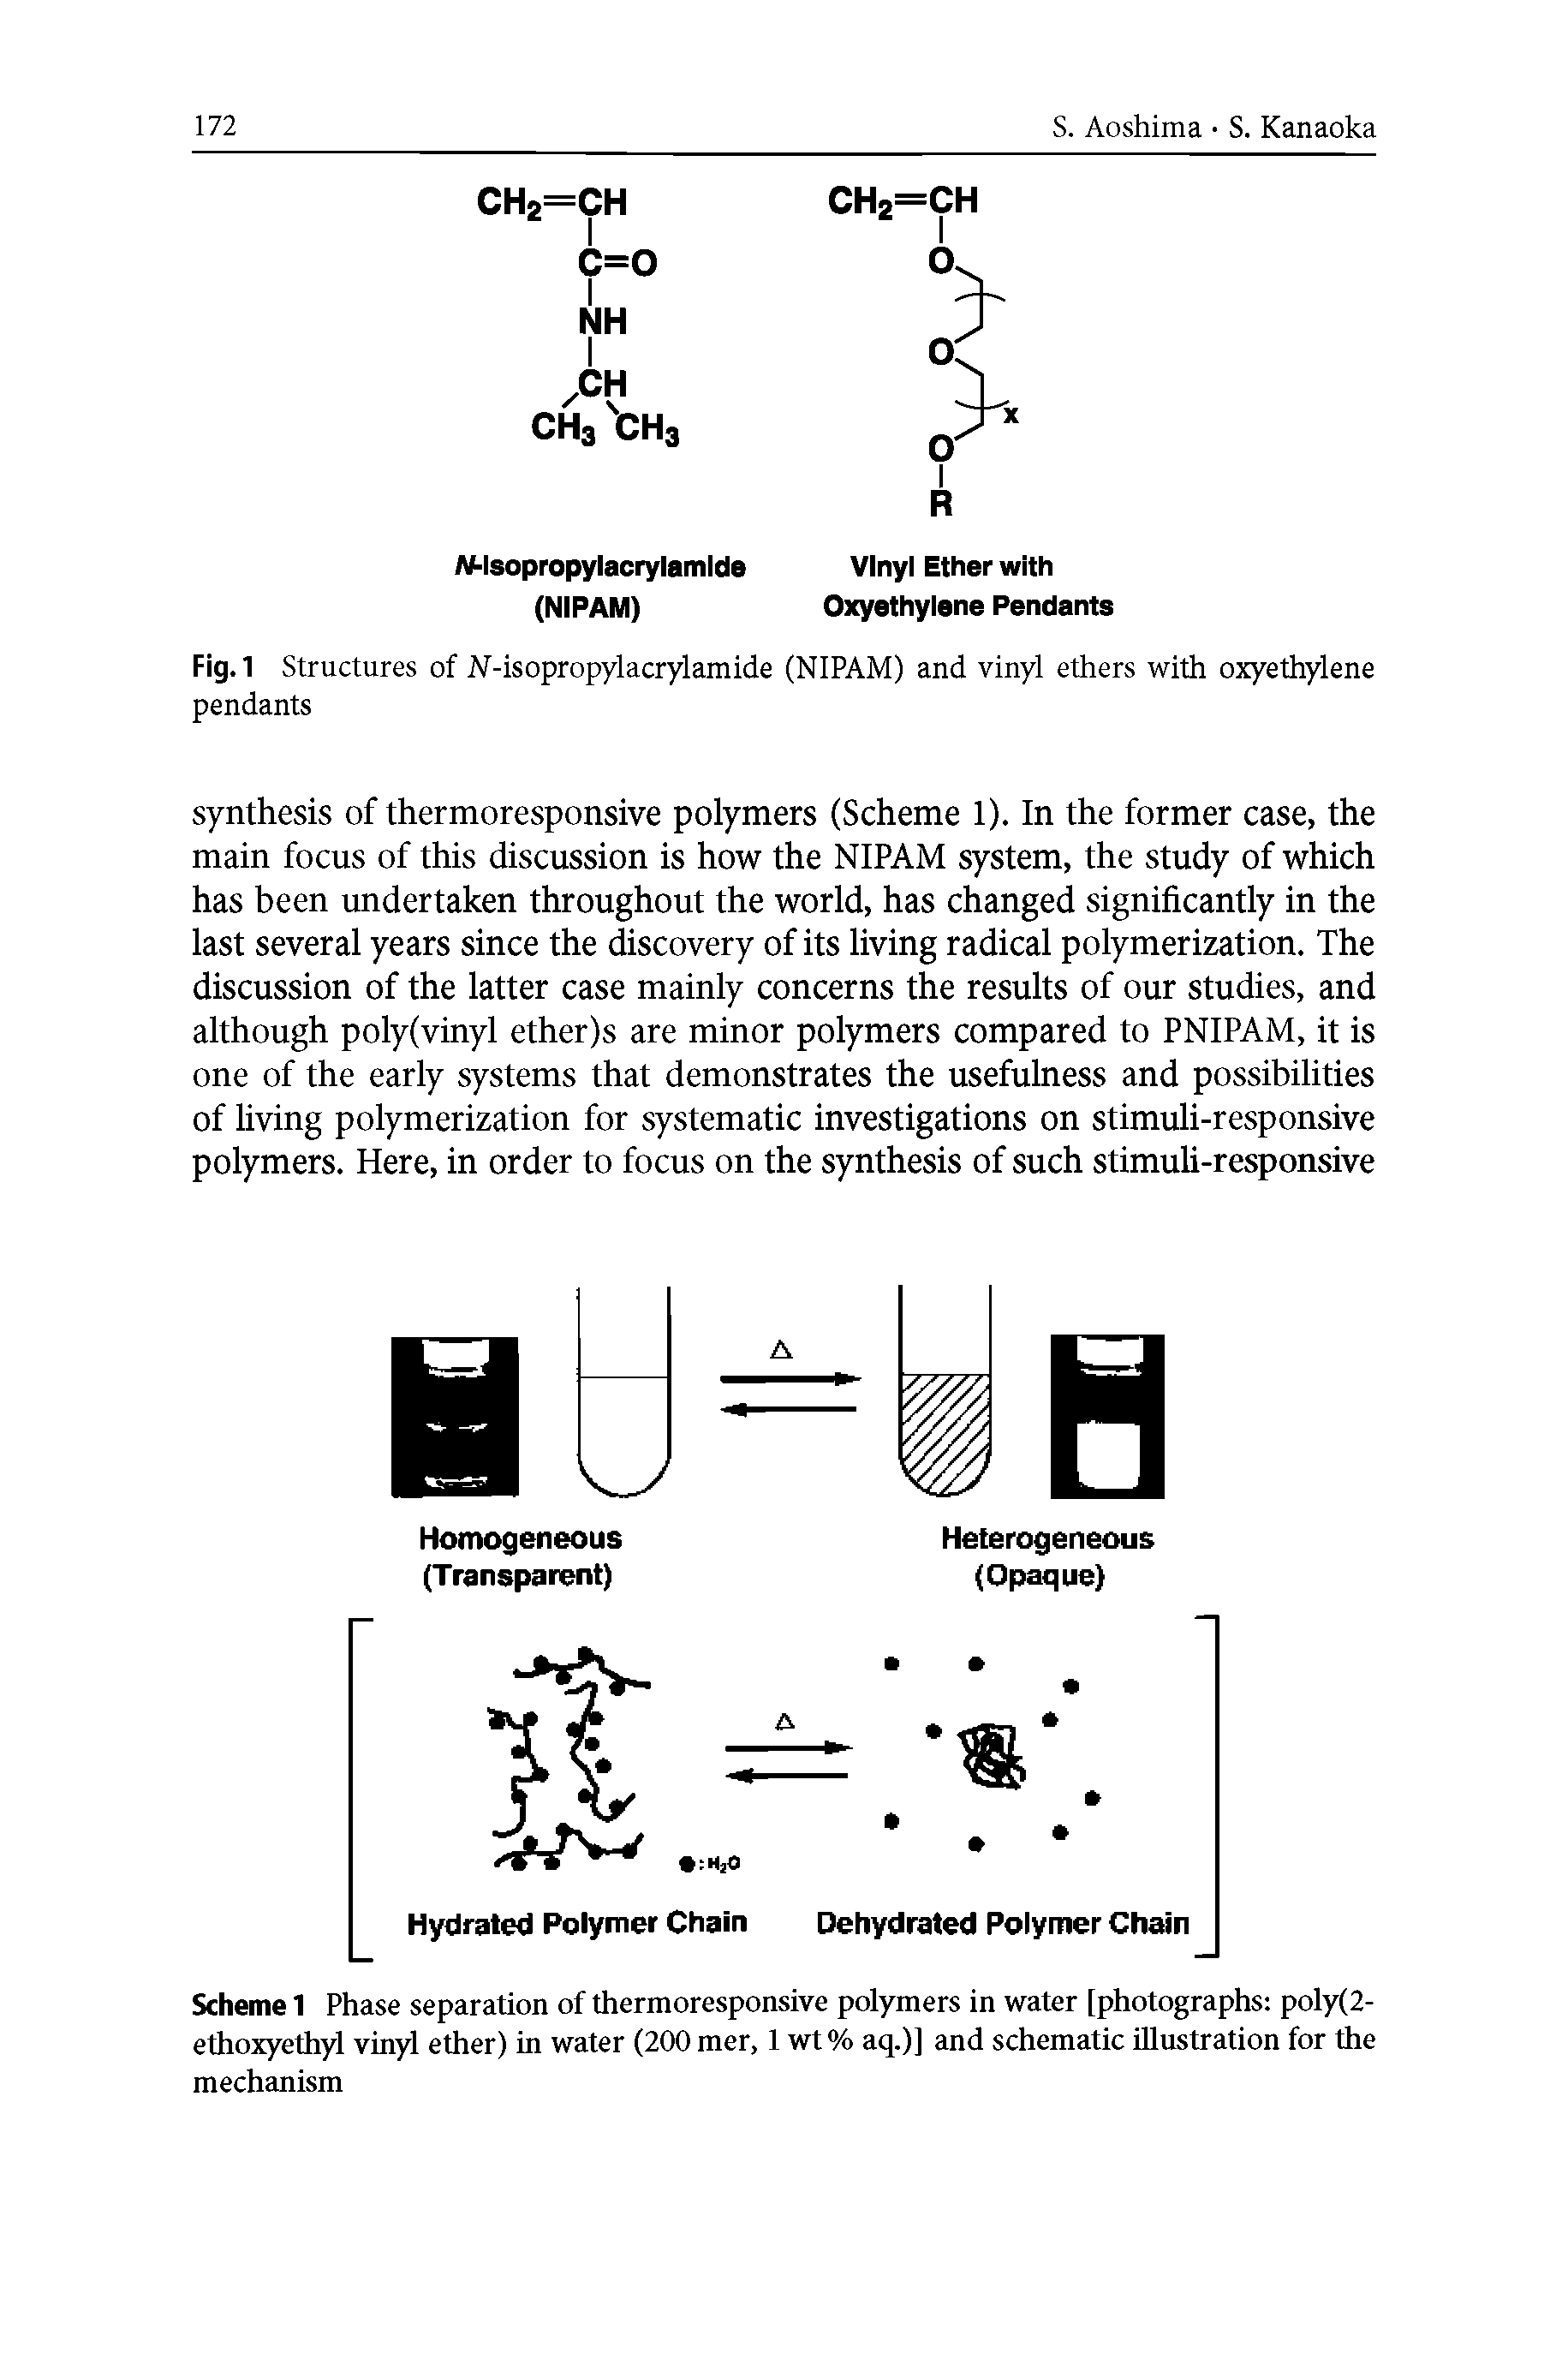 Scheme 1 Phase separation of thermoresponsive polymers in water [photographs poly(2-ethoxyethyl vinyl ether) in water (200 mer, 1 wt% aq.)] and schematic illustration for the mechanism...